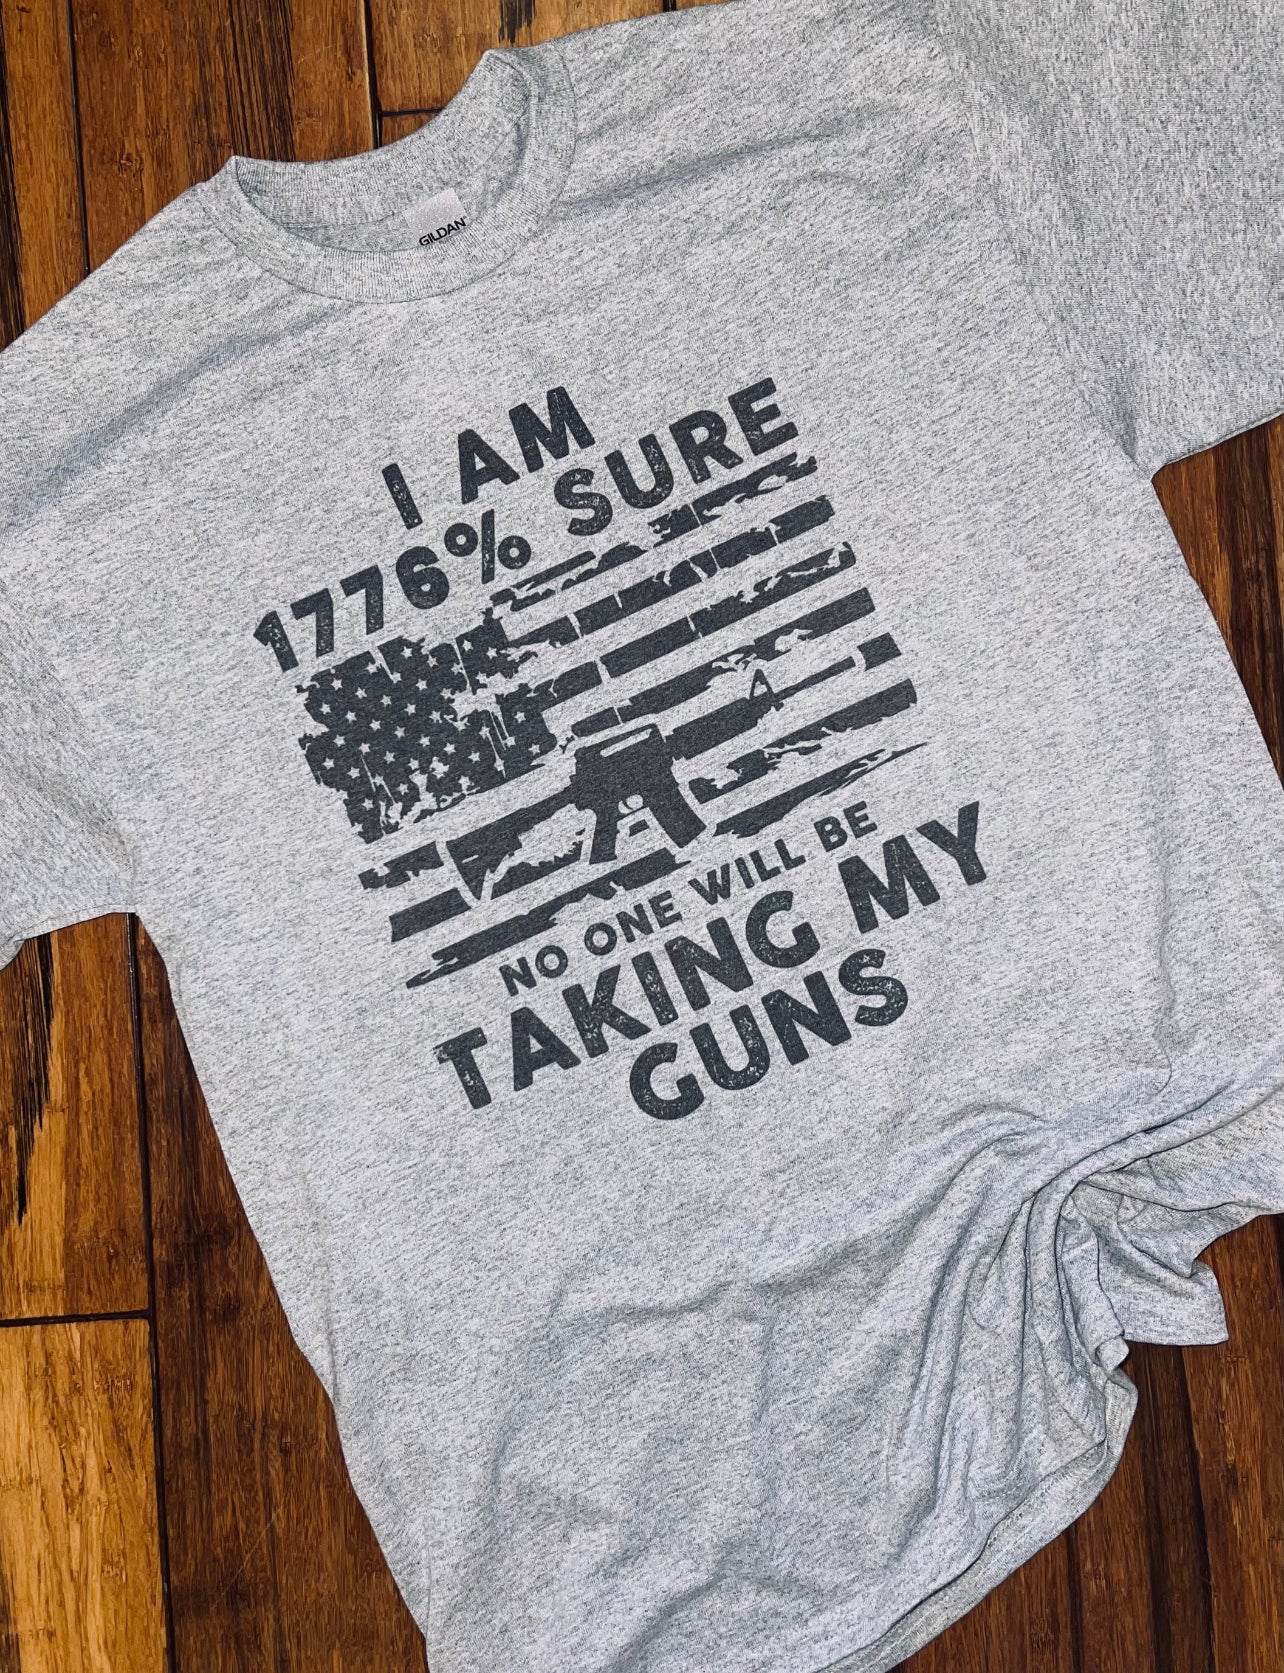 I’m 1776% sure no one will be taking my guns